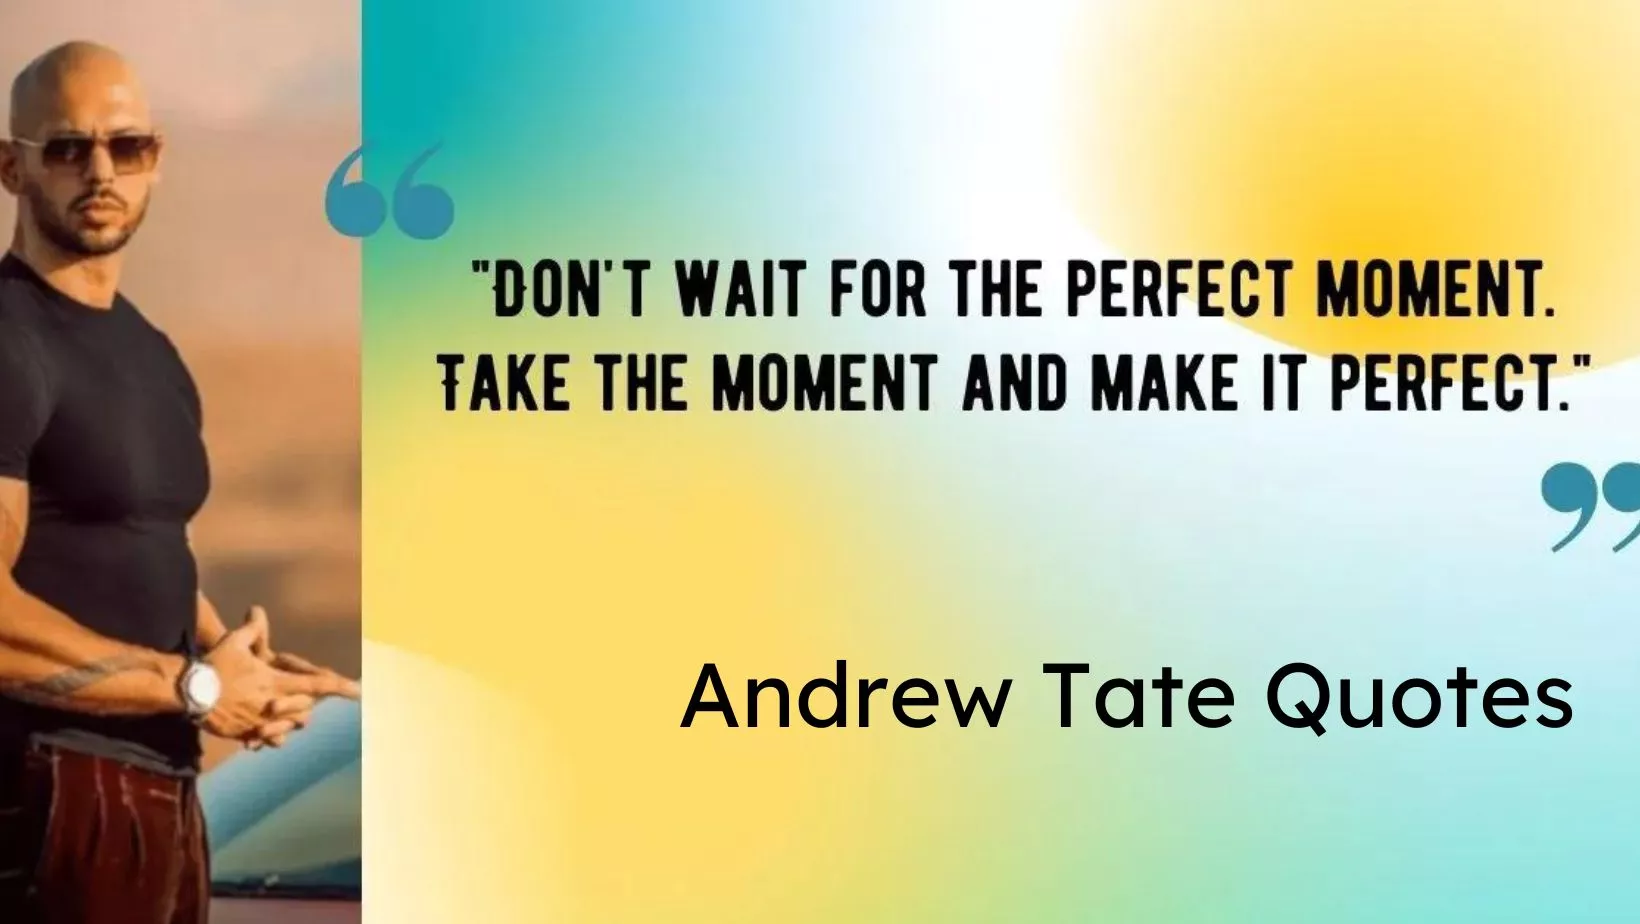 Best Andrew Tate Quotes to Inspire You